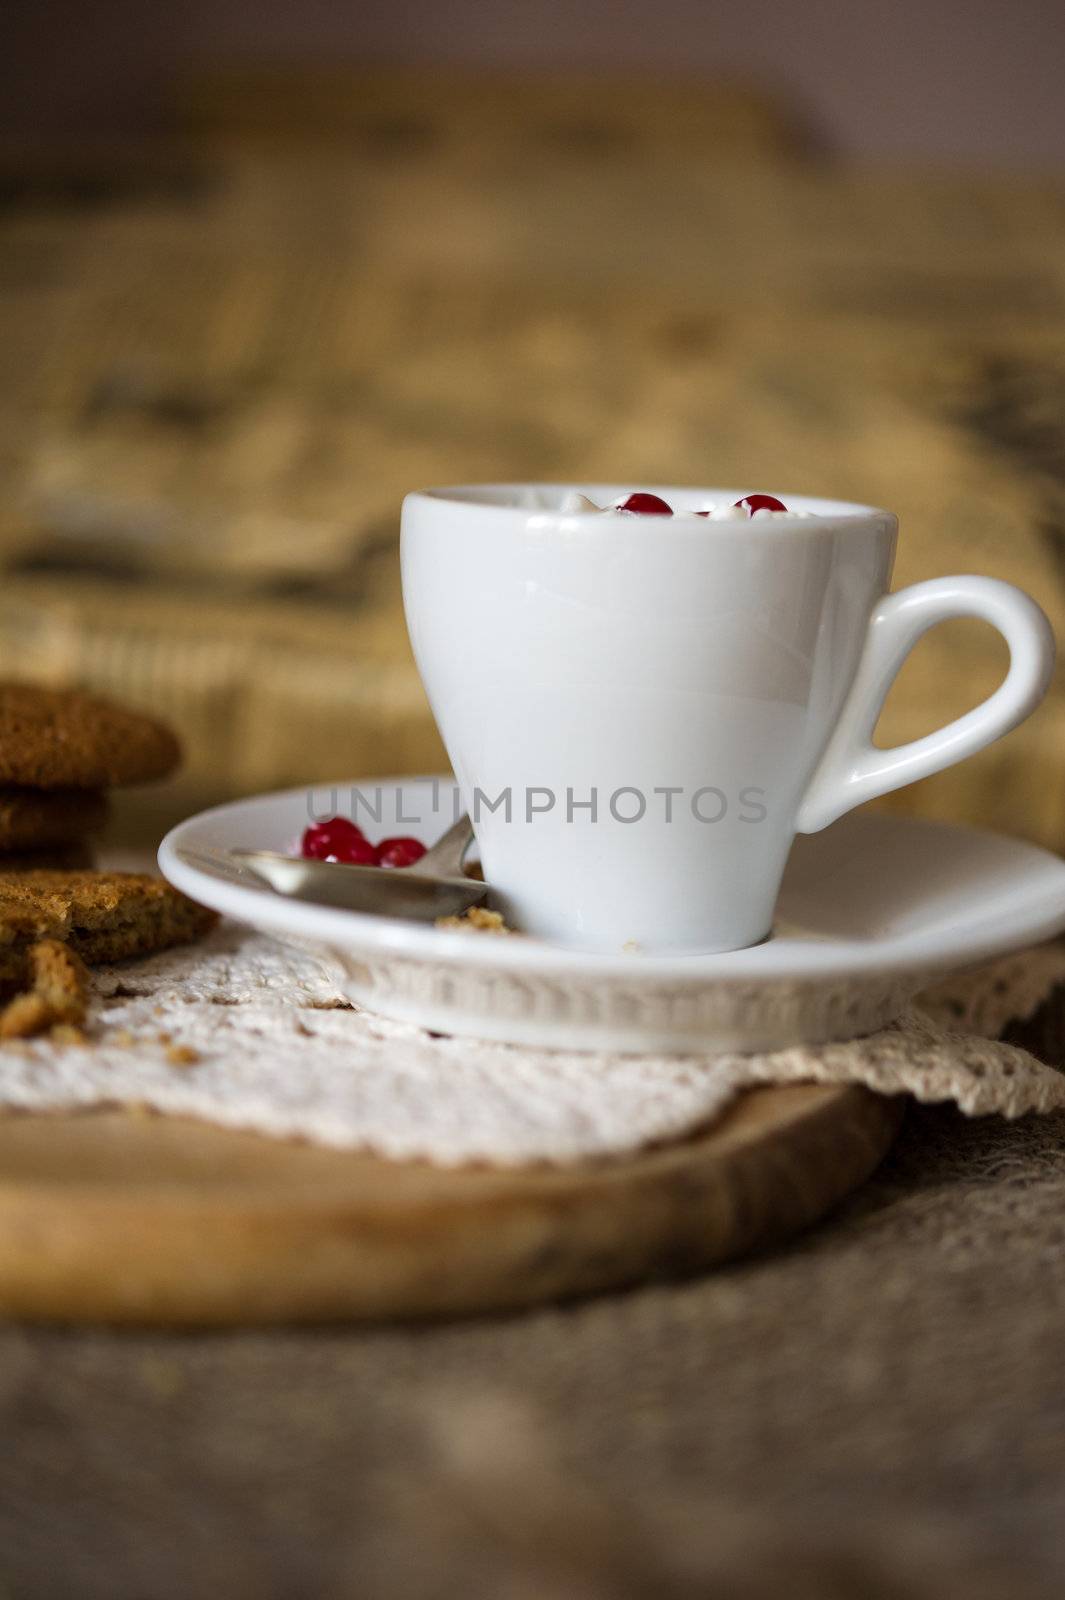 Oat biscuits with coffee and whipped cream by kirs-ua